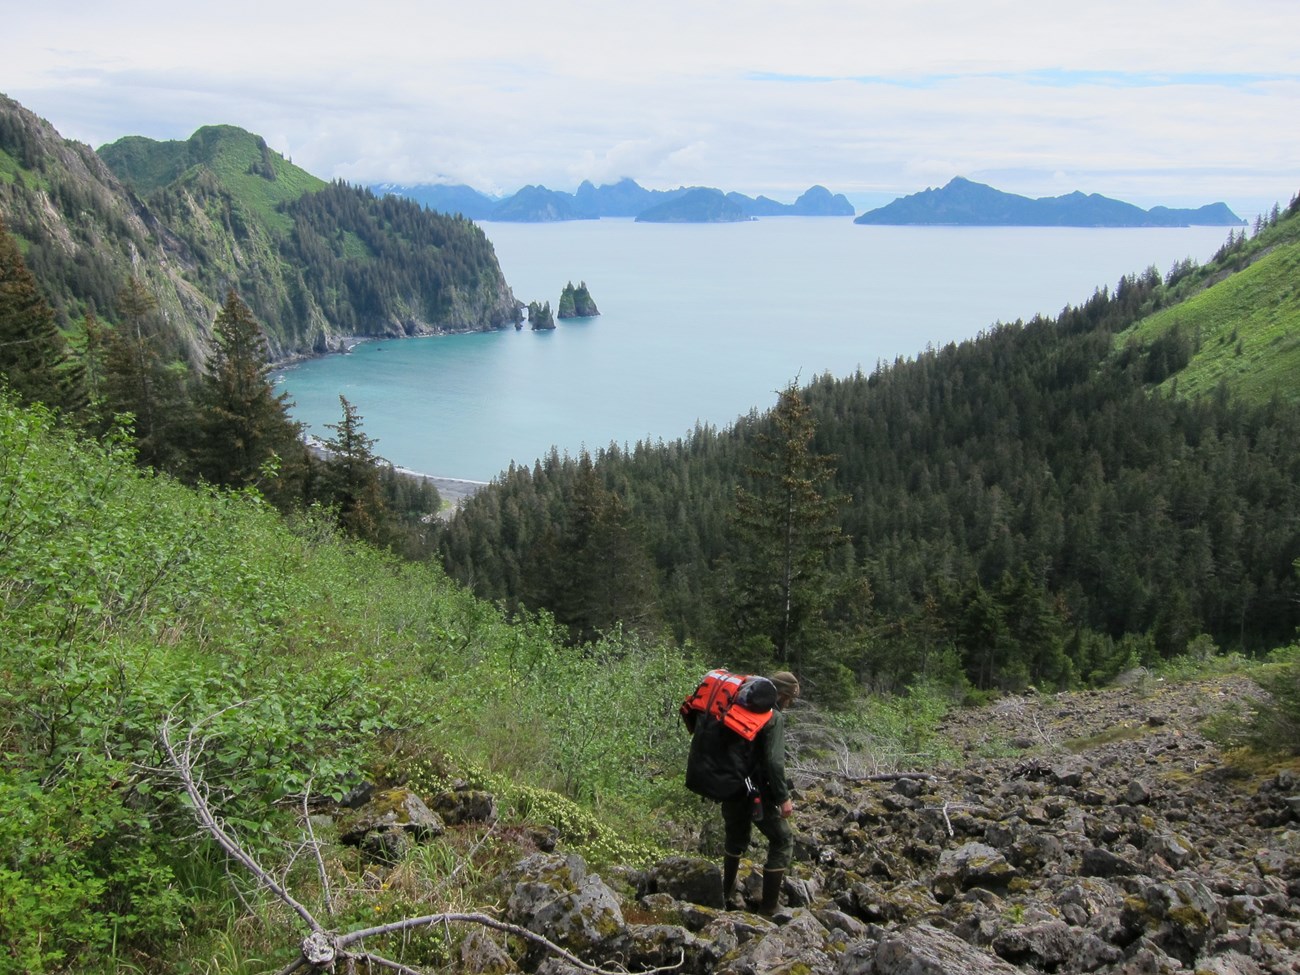 A hiker with large backpack steps down rocky terrain with a cove surrounded by steep mountains below.